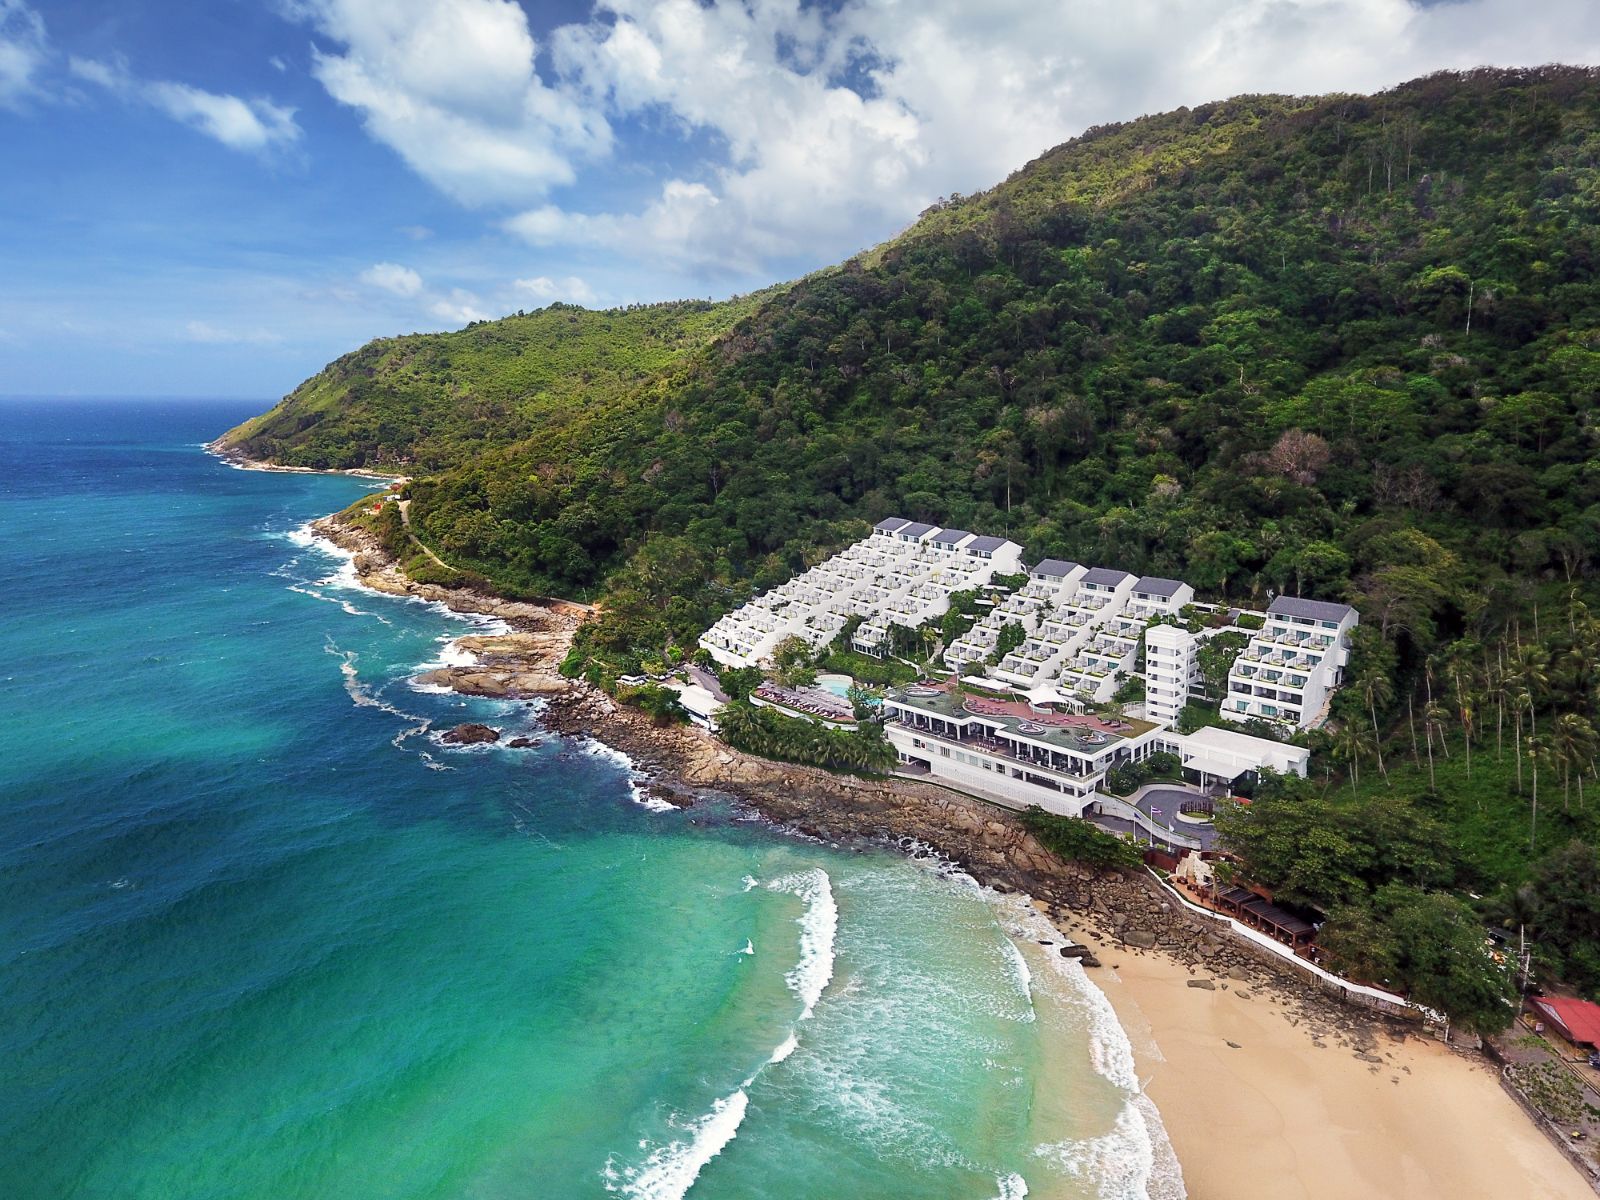 Aerial view of sea, beach and The Nai Harn resort in the Phuket region of Thailand